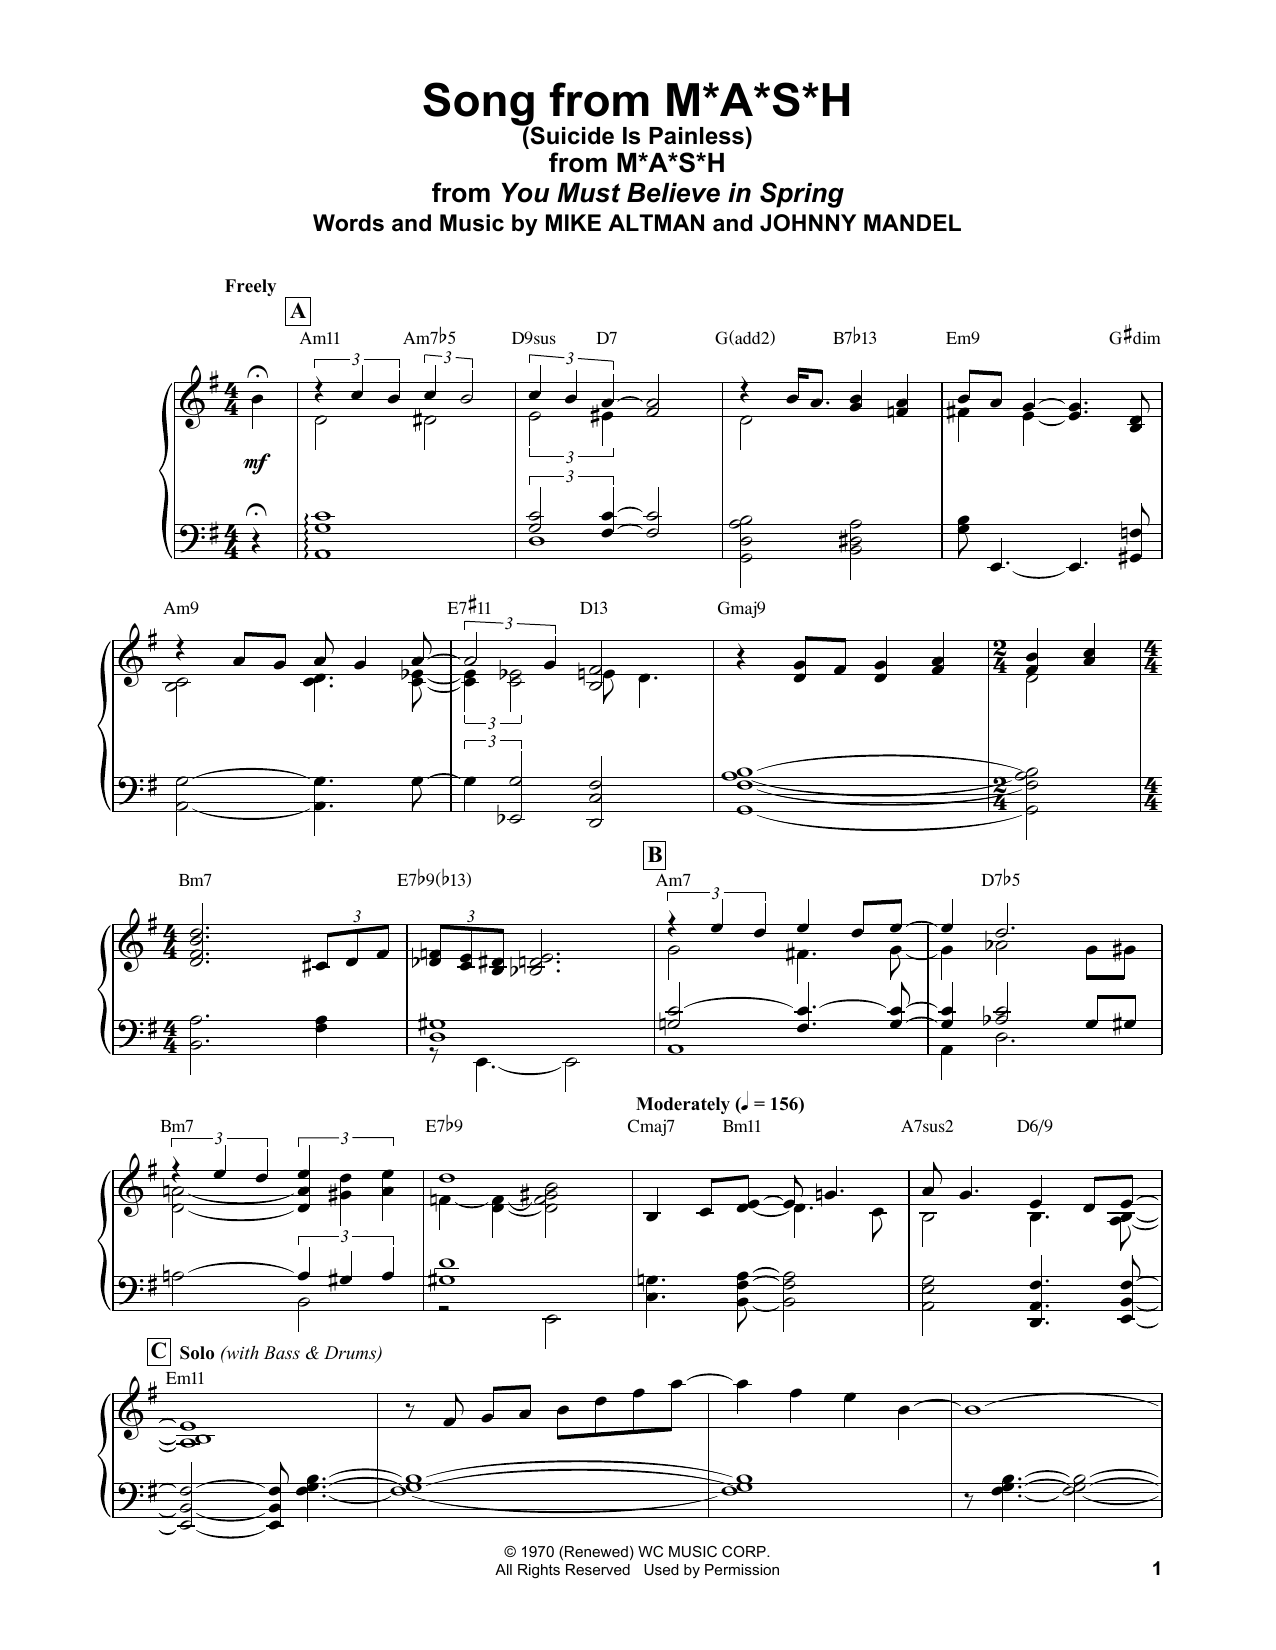 Download Bill Evans Song From M*A*S*H (Suicide Is Painless) Sheet Music